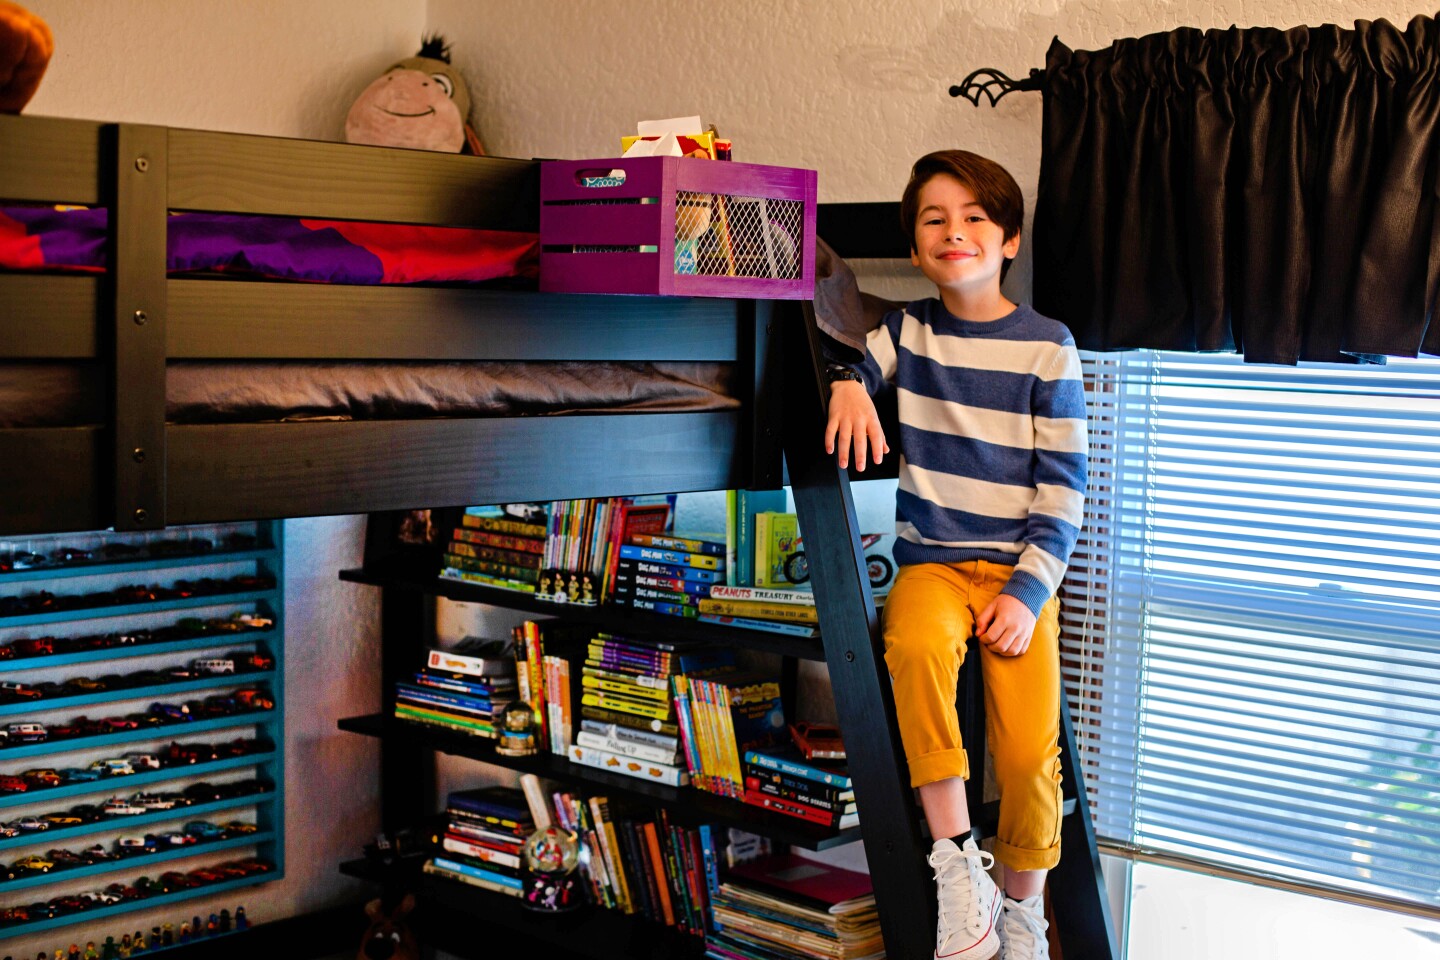 VENTURA, CALIF. - SEPT. 6, 2019 - Actor Paxton Booth plays Ollie Wrather on the Disney Channel series, "Coop & Cami Ask The World." Paxton’s bedroom, in his parents’ Ventura home, houses all the things he loves - vinyl LPs he finds at swap meets, lanyards from the red-carpet events he attends, his Mickey Mouse ears and a series of newsboy caps. The bedroom features a mash-up of colors - a red dresser, a fuchsia rug, purple bedding. (Jesse Goddard / For The Times)